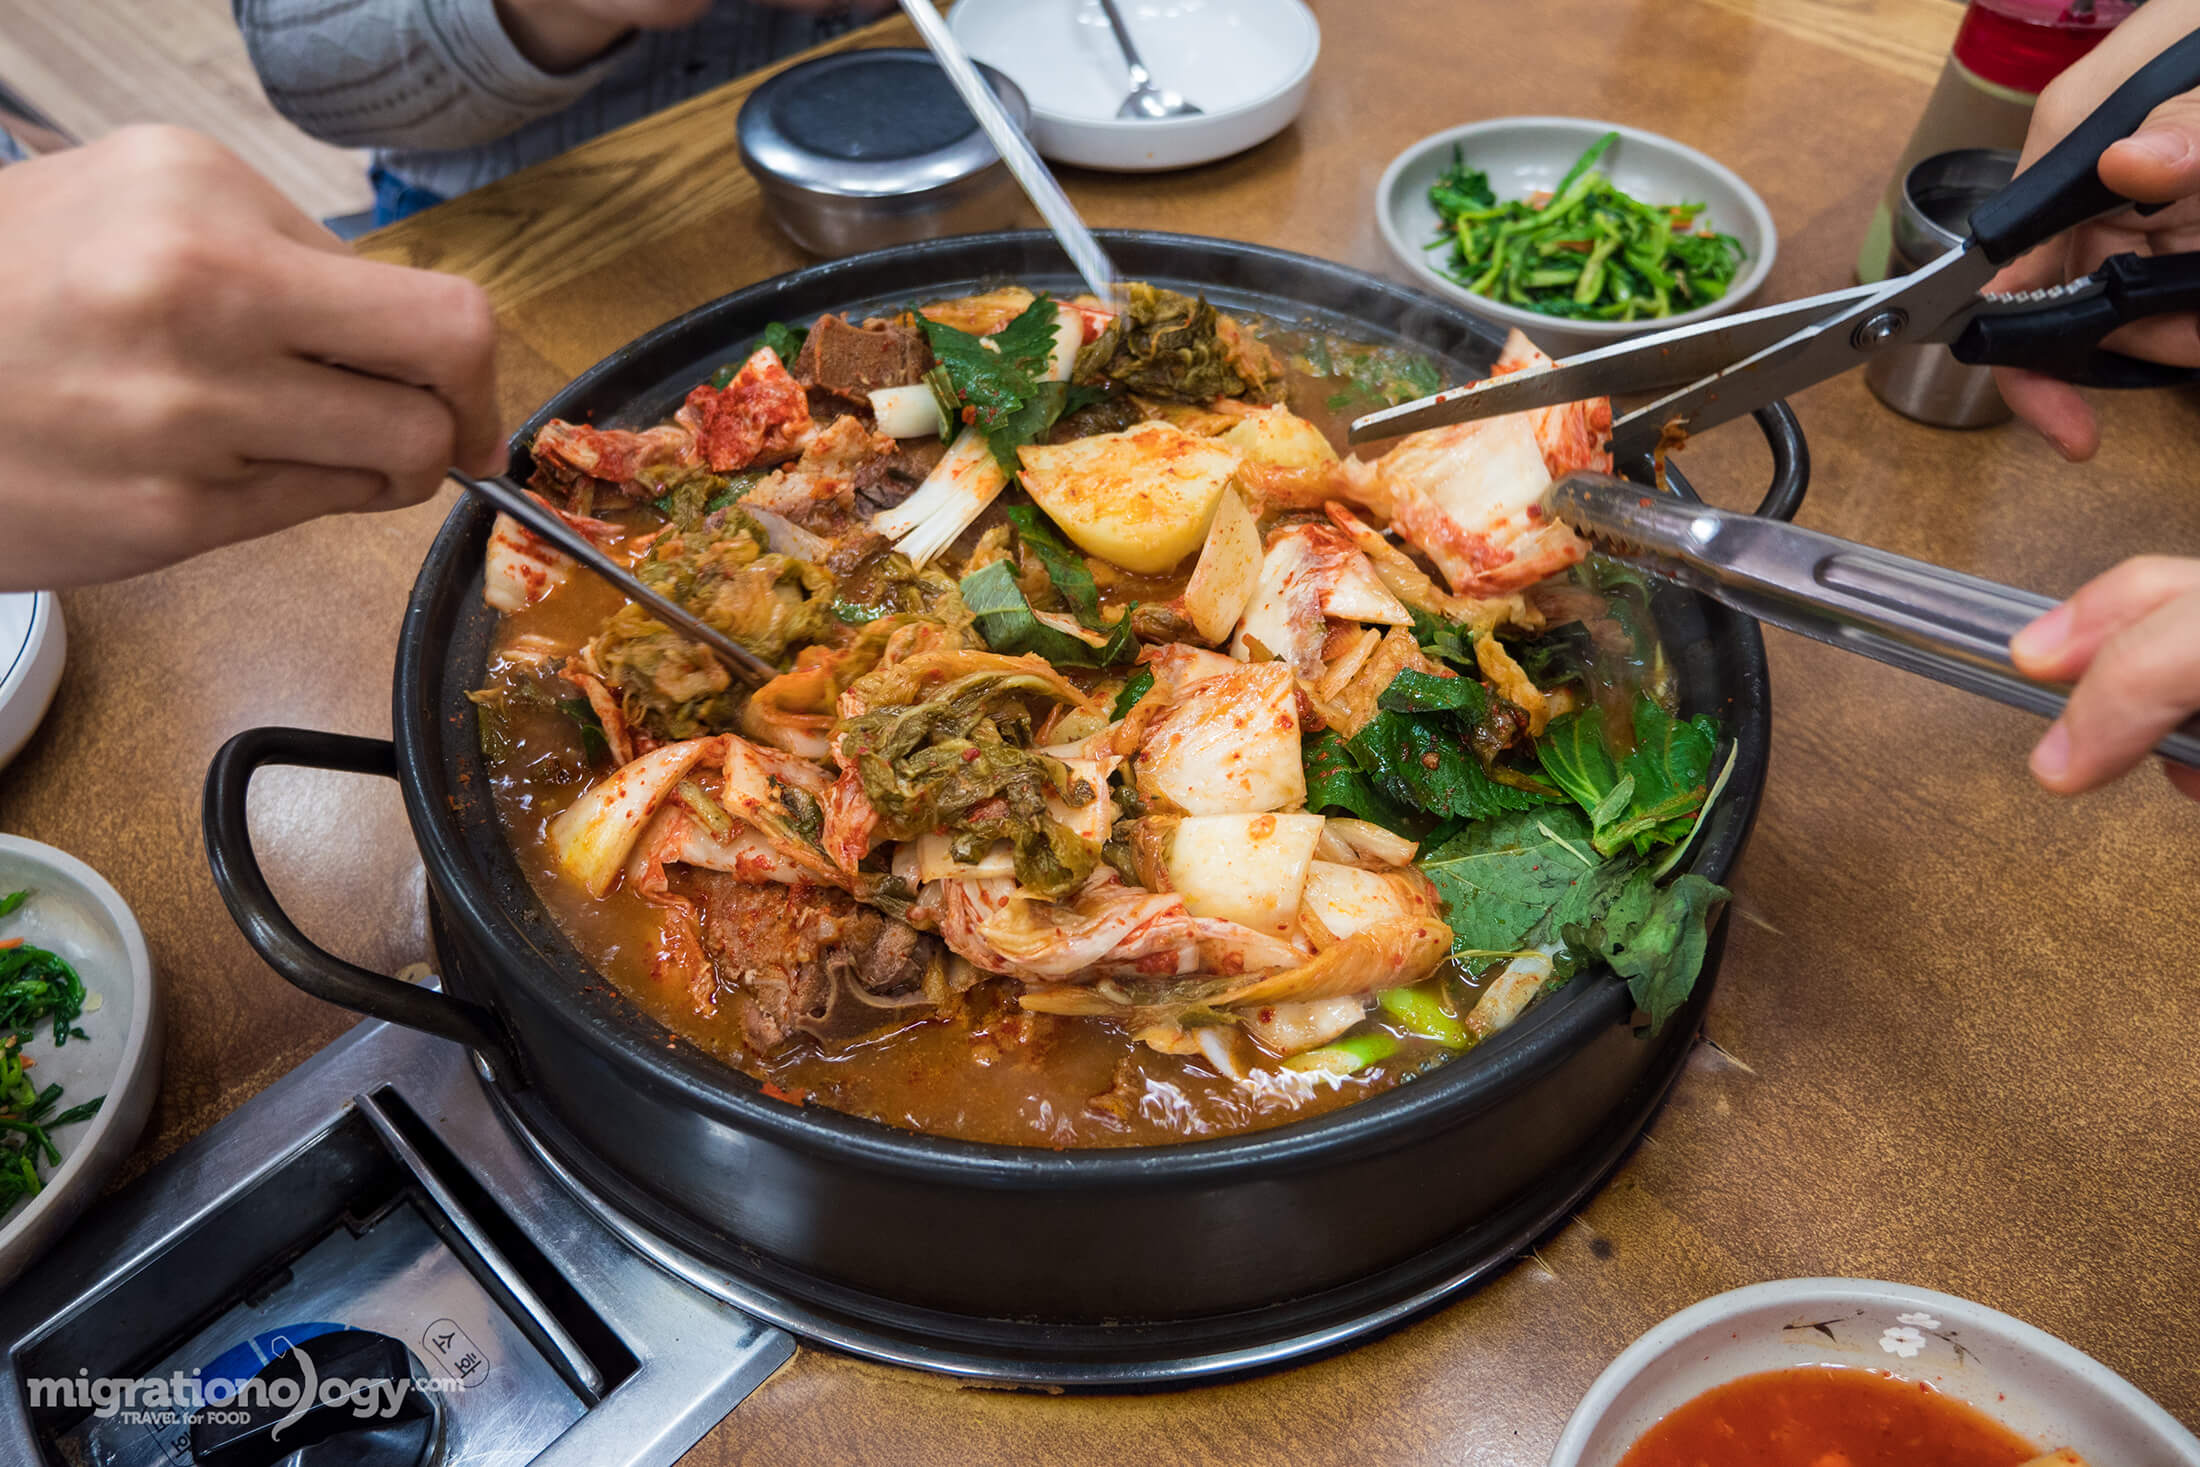 South Korean Food: 29 of the Best Tasting Dishes